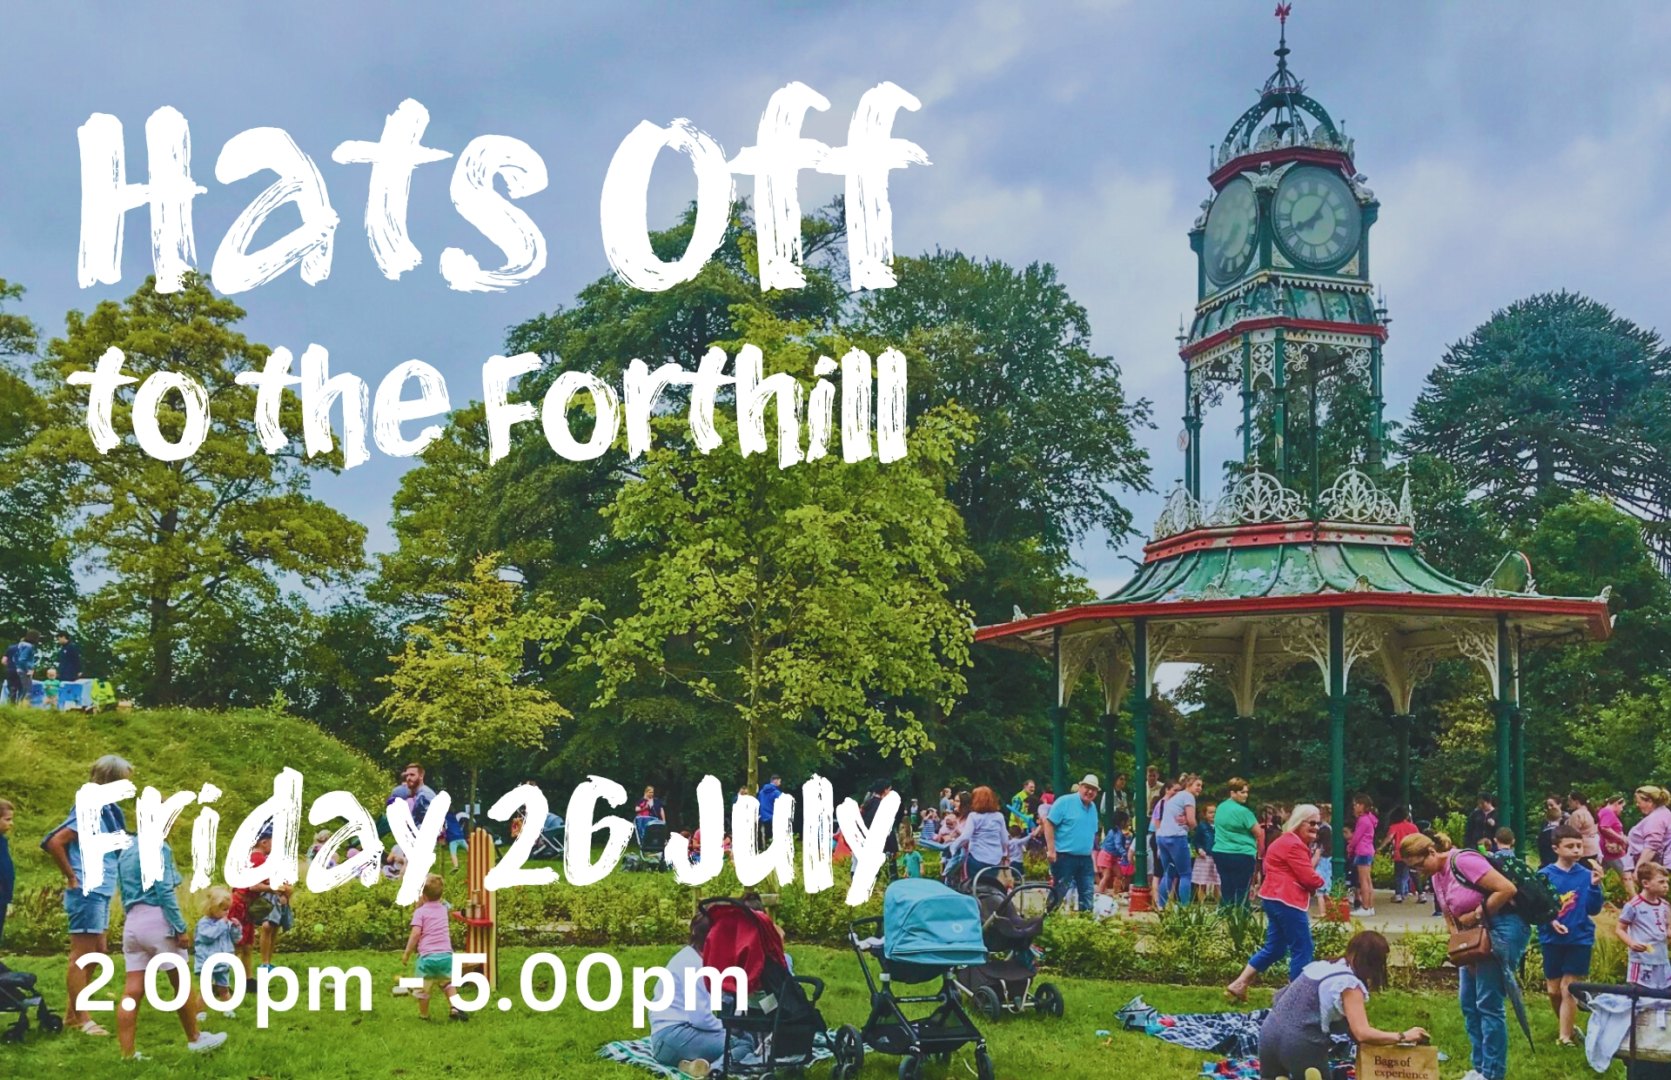 Website Image Hats Off to the Forthill (1920 x 1241 px) (2)